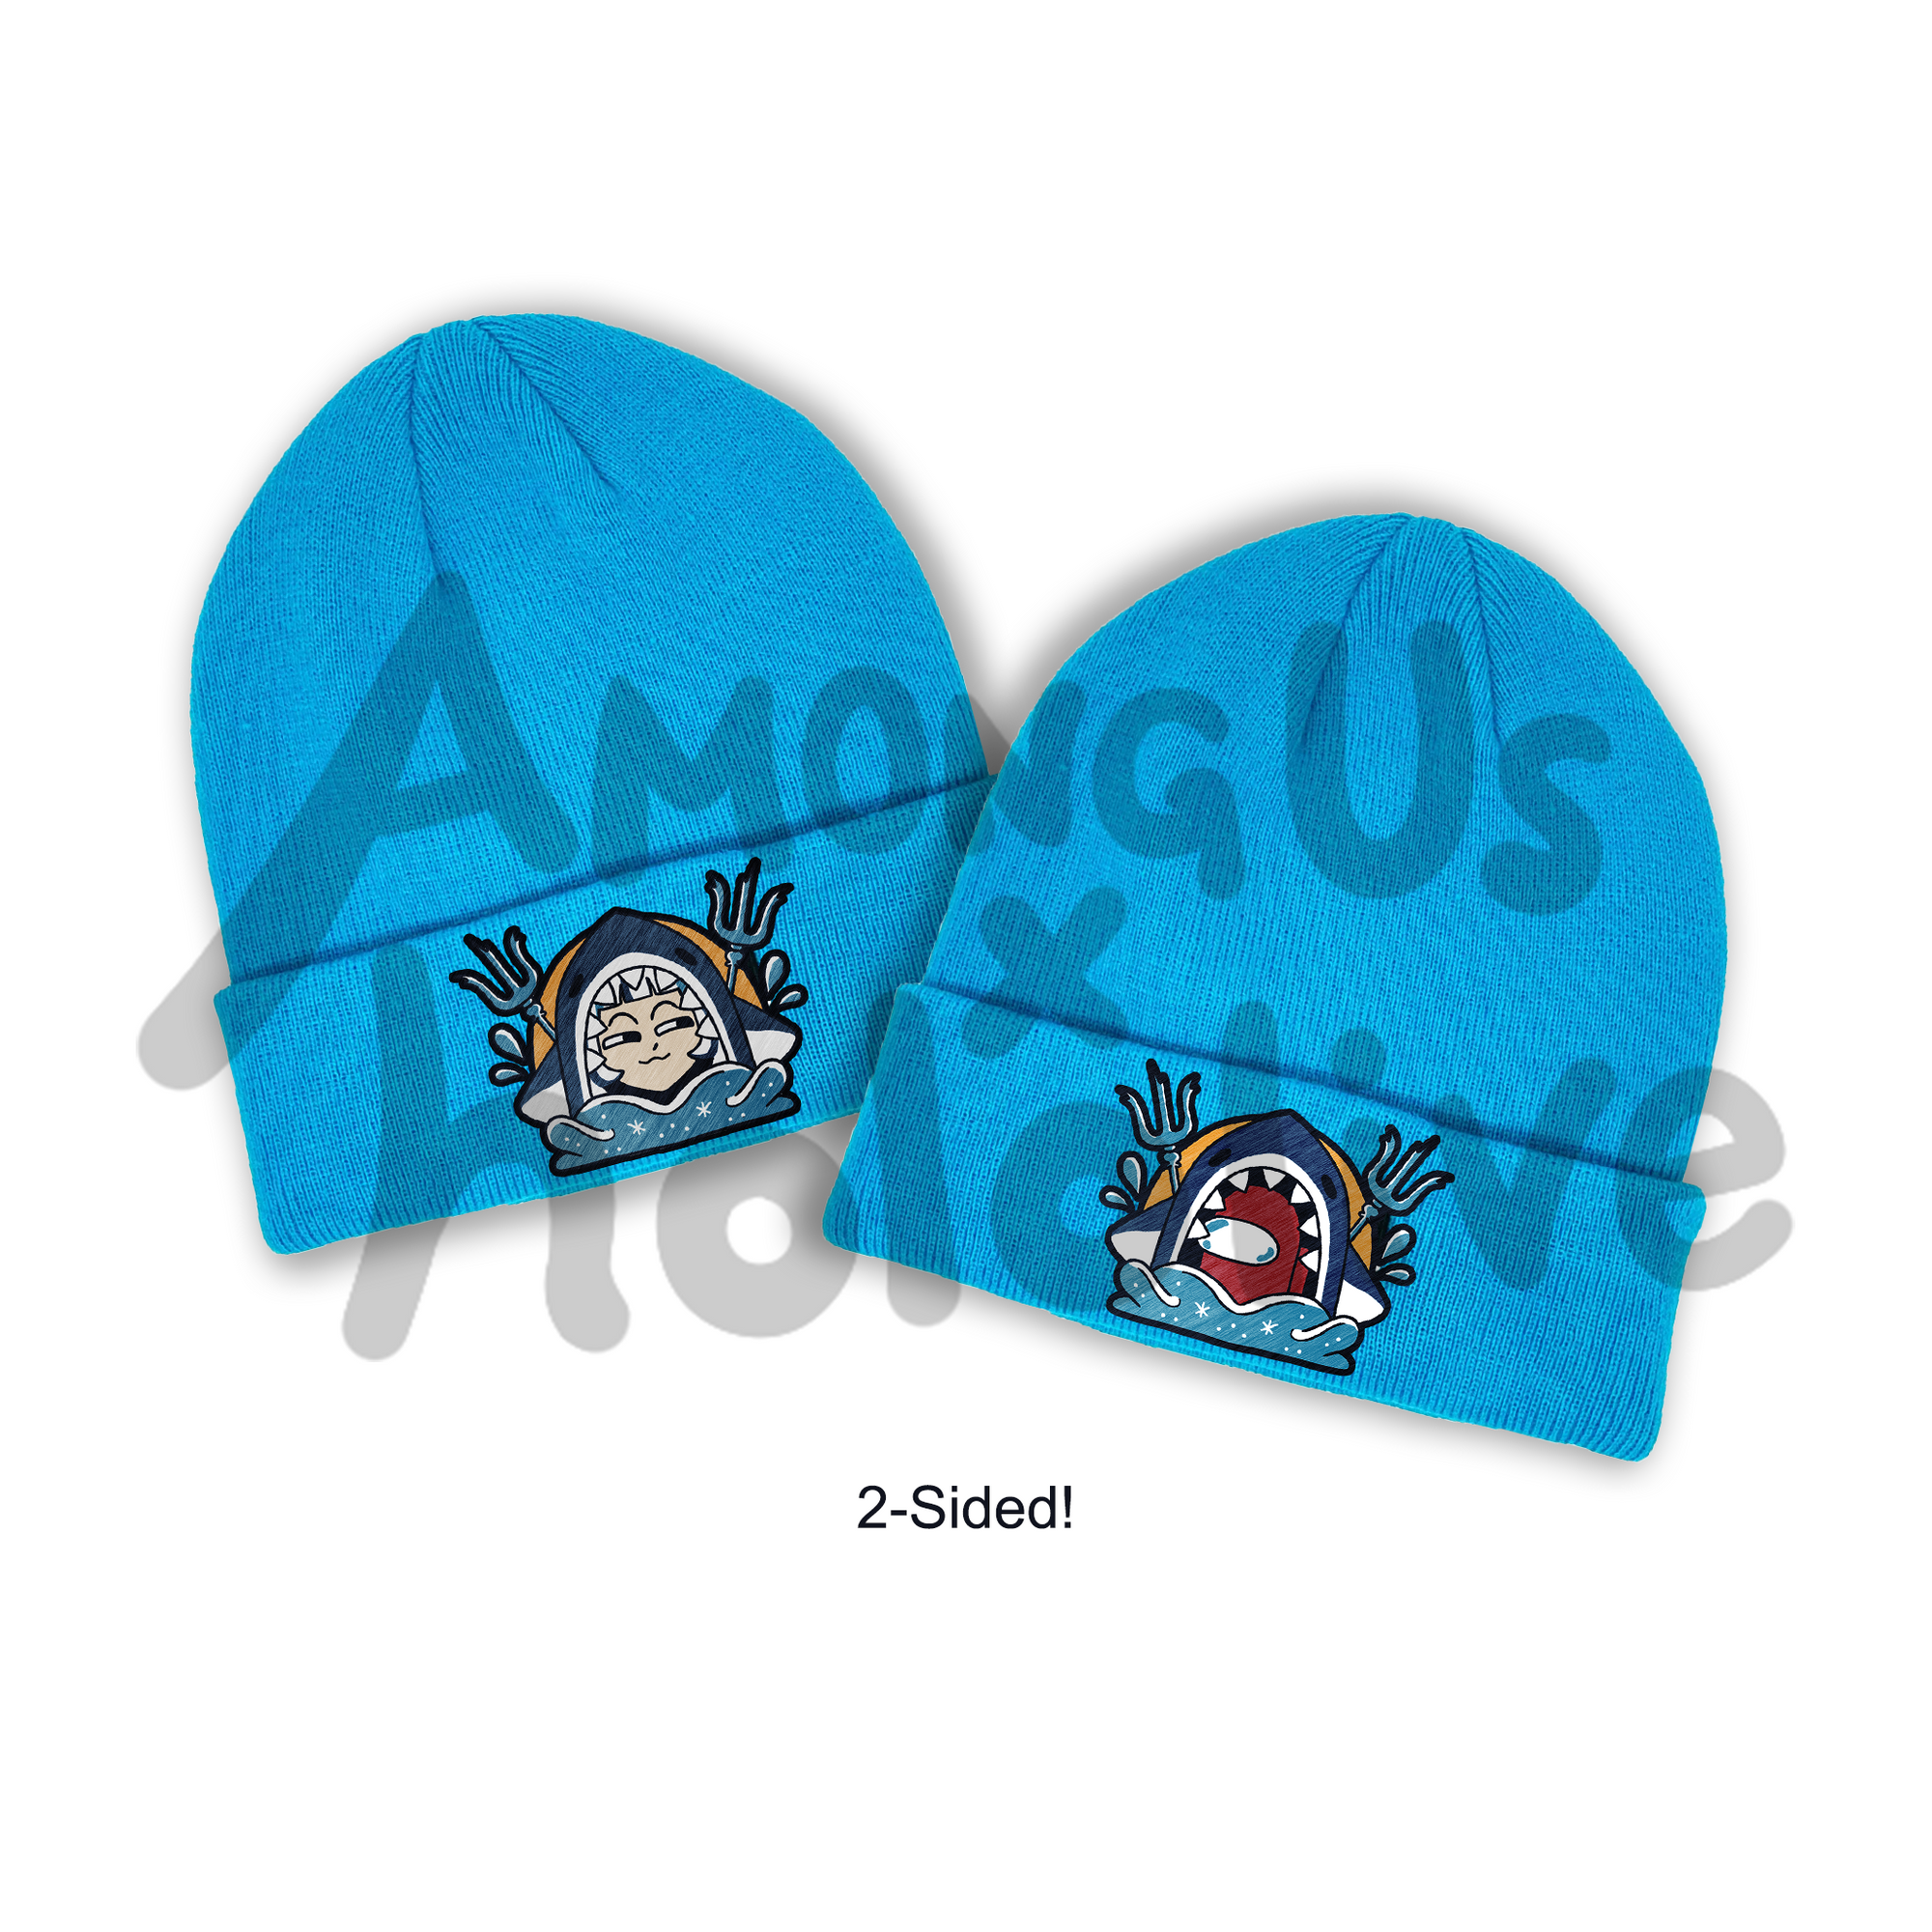 A product image showing off both sides of the Hololive x Among Us Gwar Gura 2-Sided cyan Beanie.   Both sides of the beanies have an embroidery featuring a character from Hololive or Among Us inside a shark mouth (Gura looking Mischevious on the right and Red Crewmate looking suspicious on the left). There are sparkly waves come up over the shark body, and two tridents with splashes. The other sides of them. Art by Ren Strapp